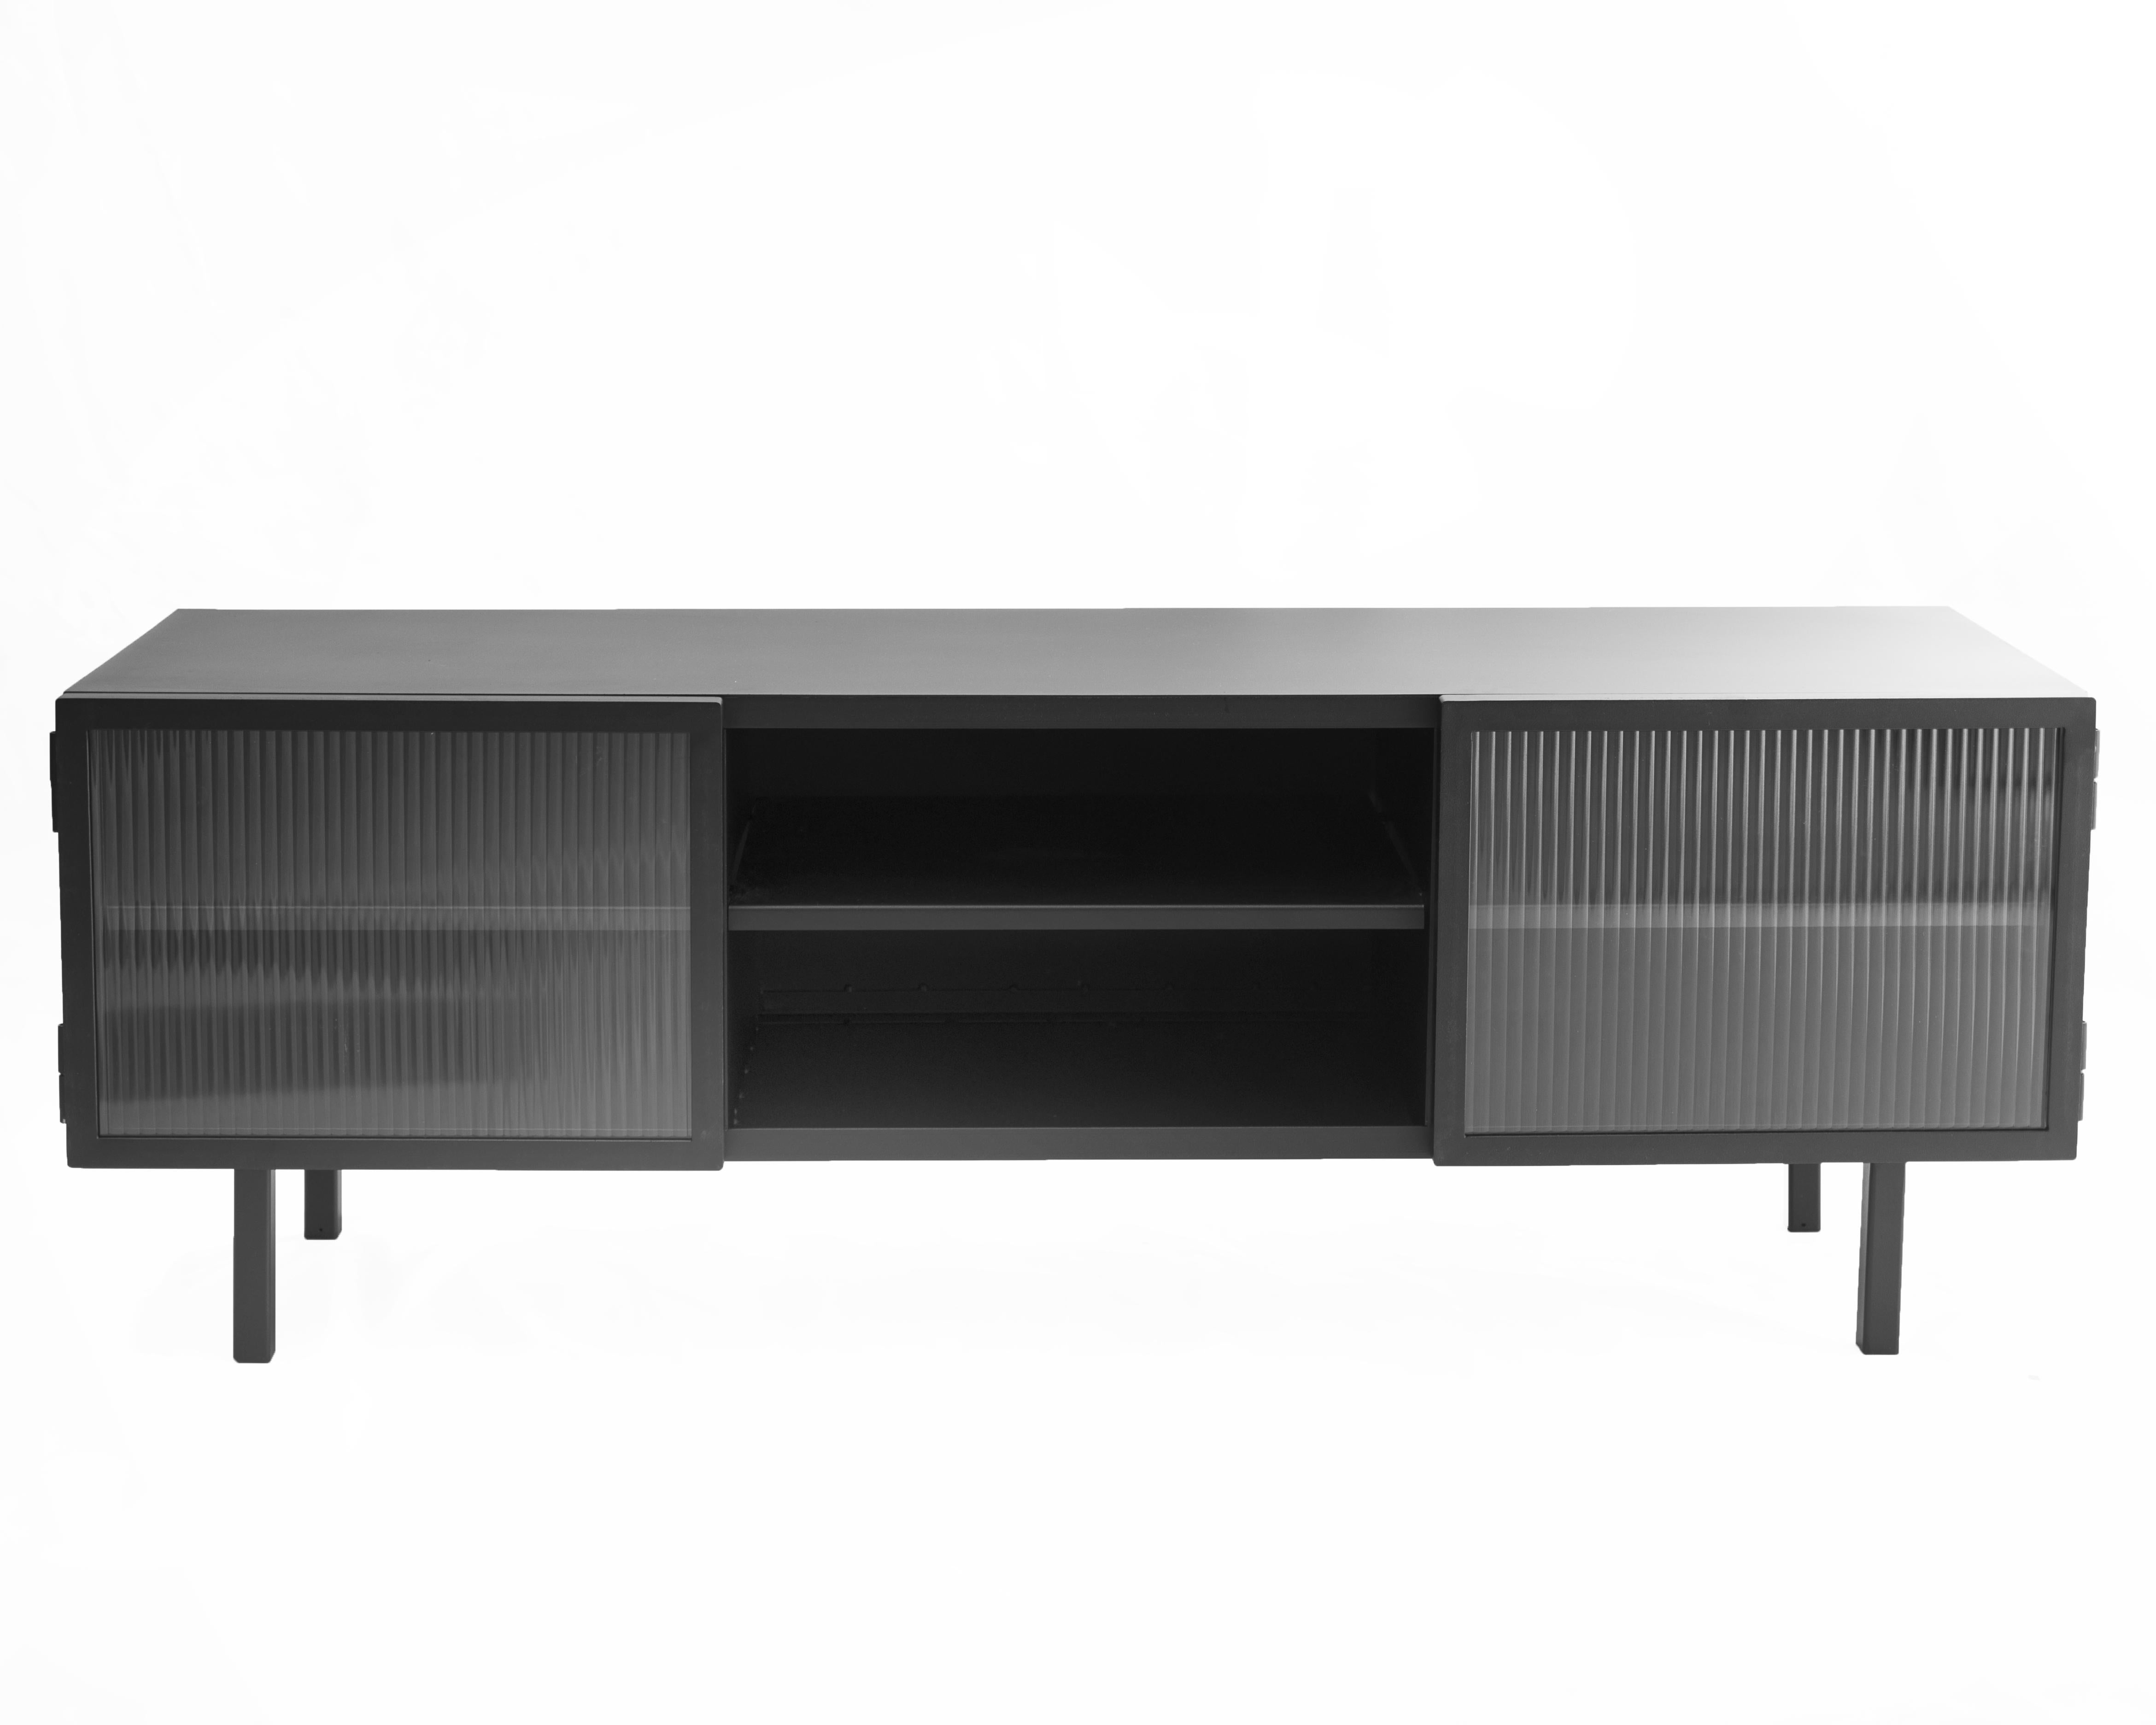 Object 023 TV cabinet by NG Design
Dimensions: D 160 x W 46 x H 56 cm
Materials: Powder coated steel, tempered glass.

Also Available: All of objects available in different materials and colors on demand.

Put your electronics in the middle,